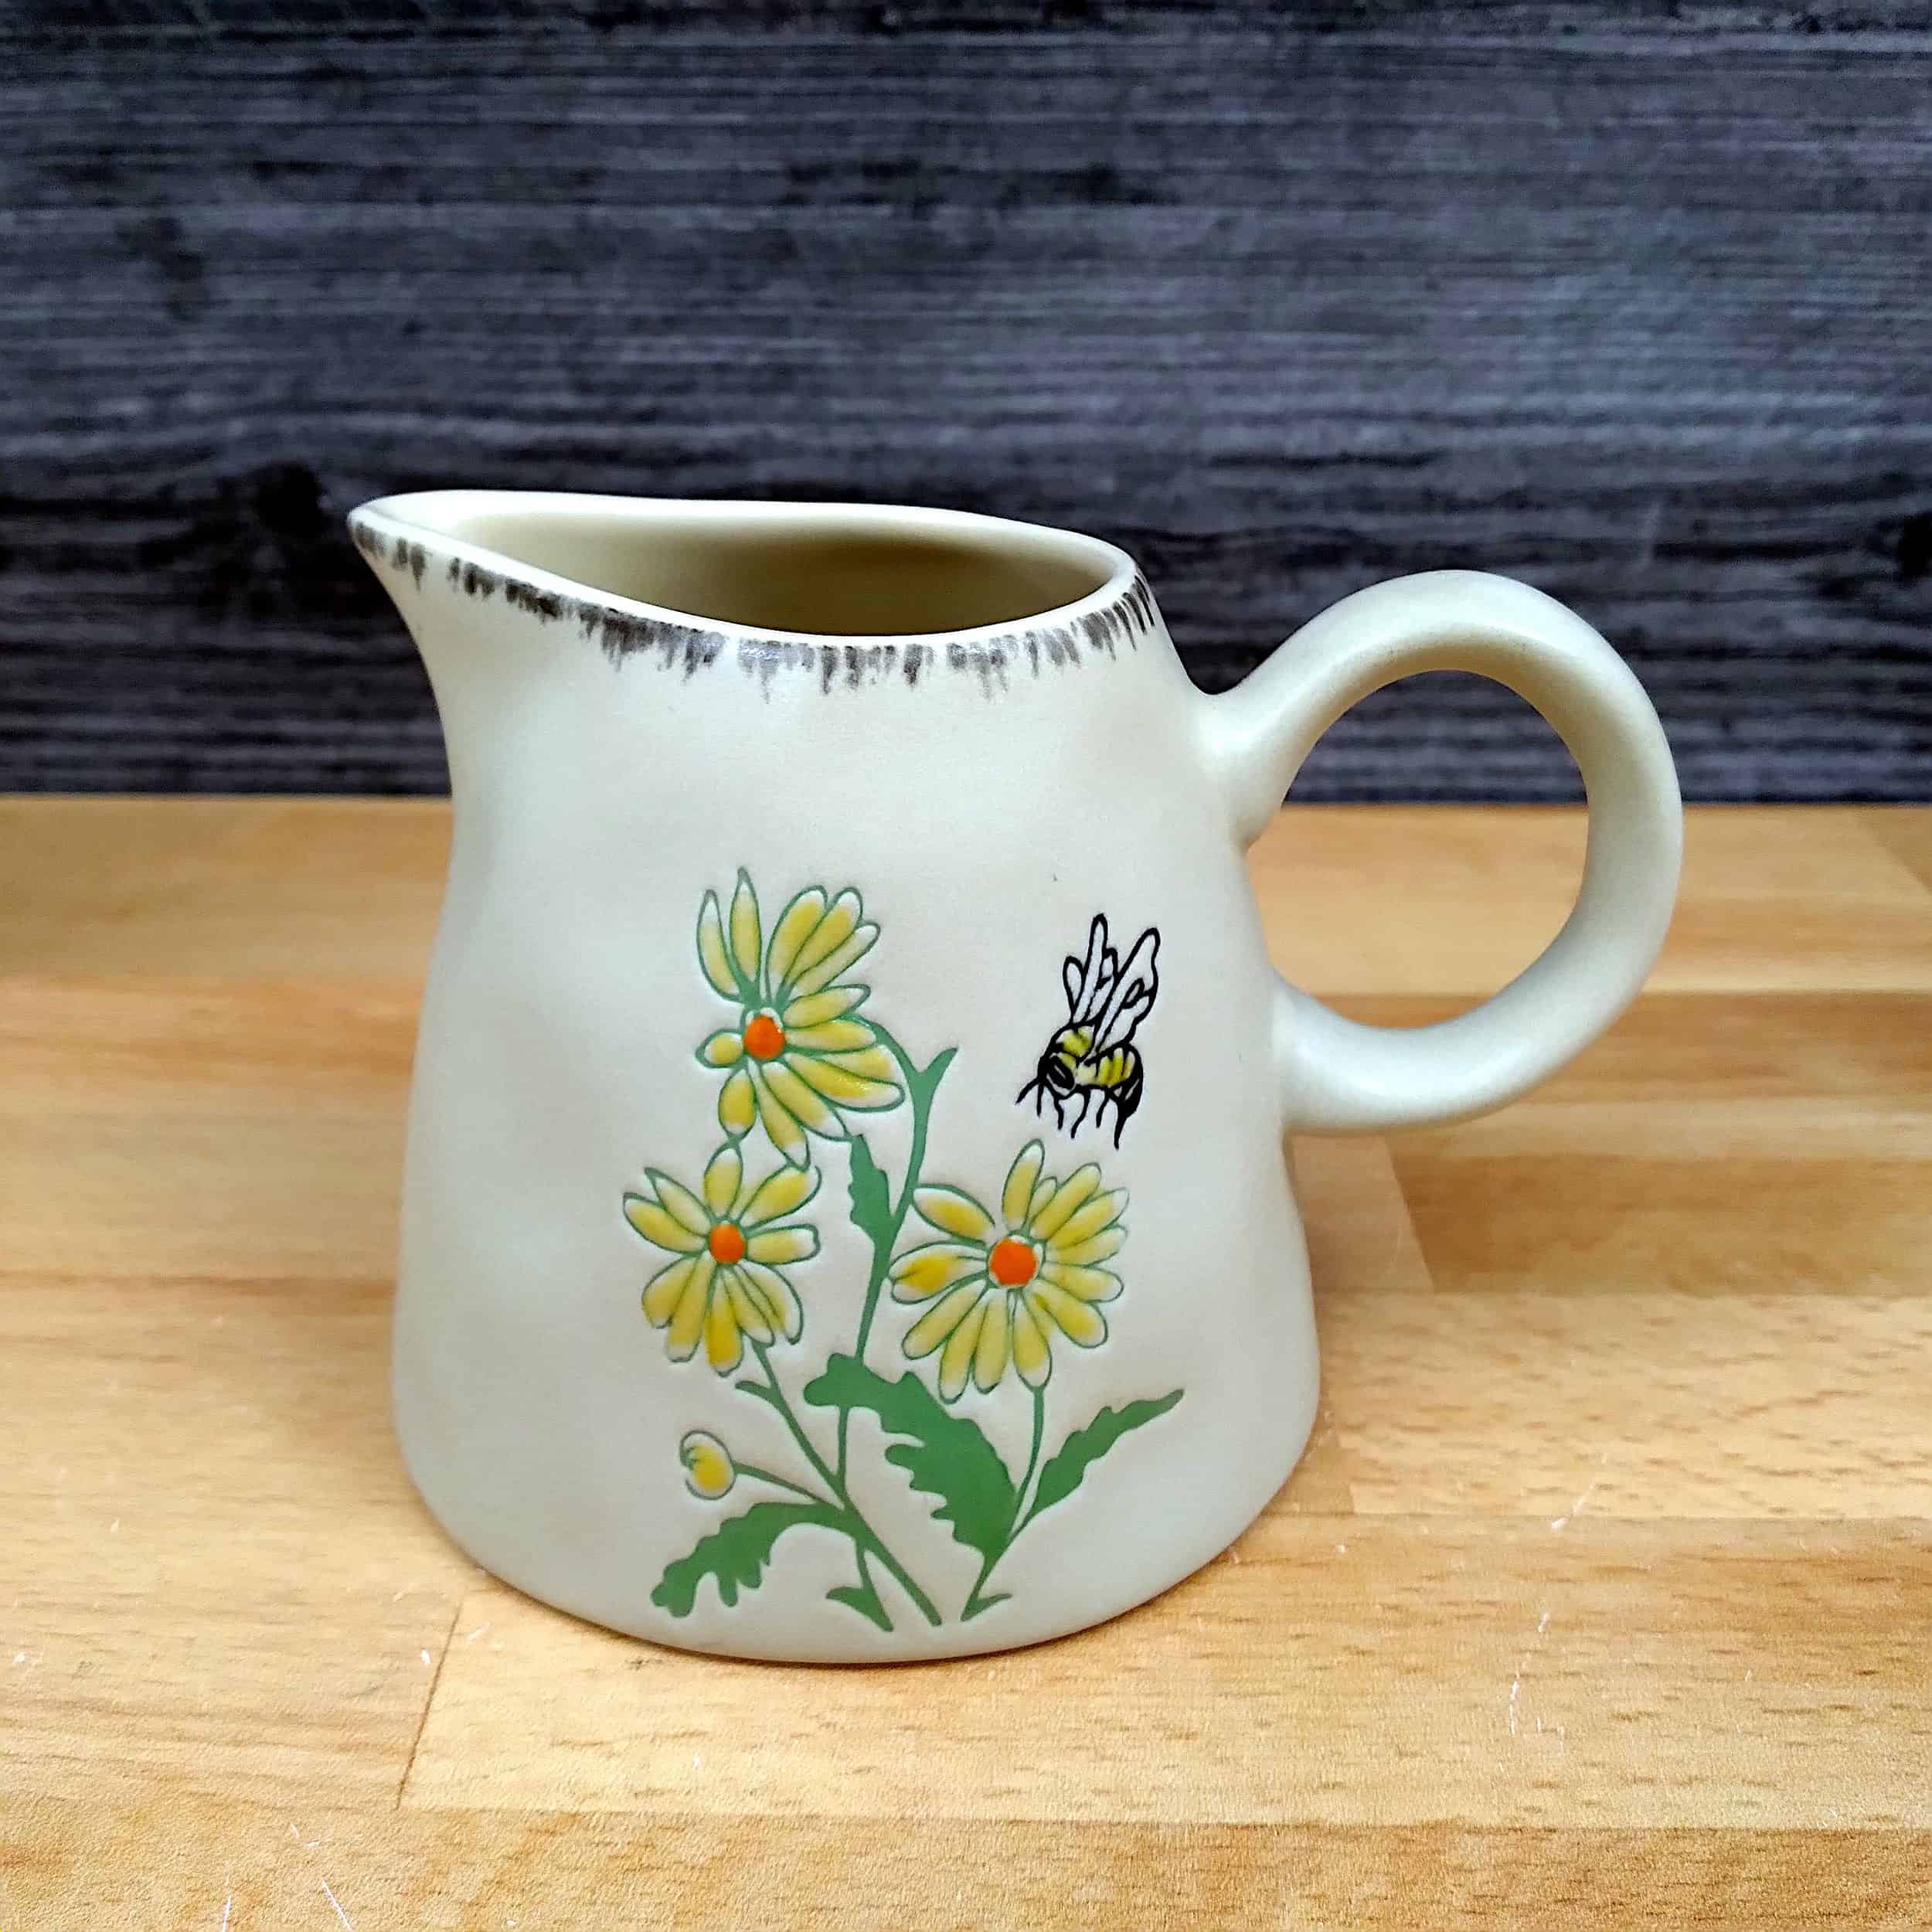 This Bumble Bee and Flower Sugar Bowl and Creamer Set Decorative by Blue Sky is made with love by Premier Homegoods! Shop more unique gift ideas today with Spots Initiatives, the best way to support creators.